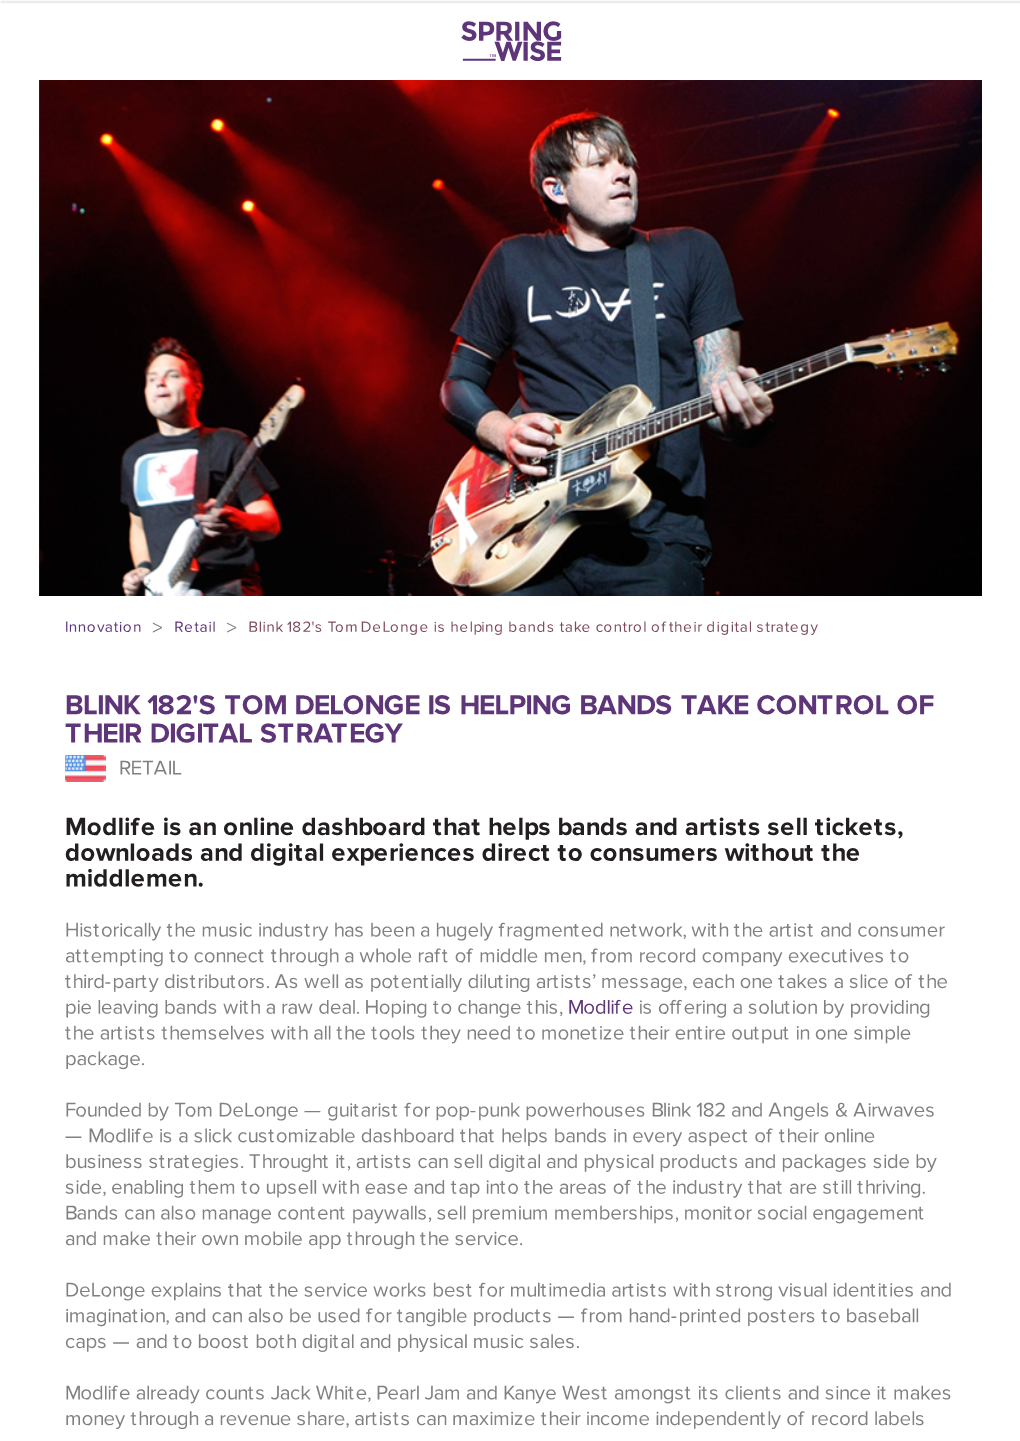 Blink 182'S Tom Delonge Is Helping Bands Take Control of Their Digital Strategy